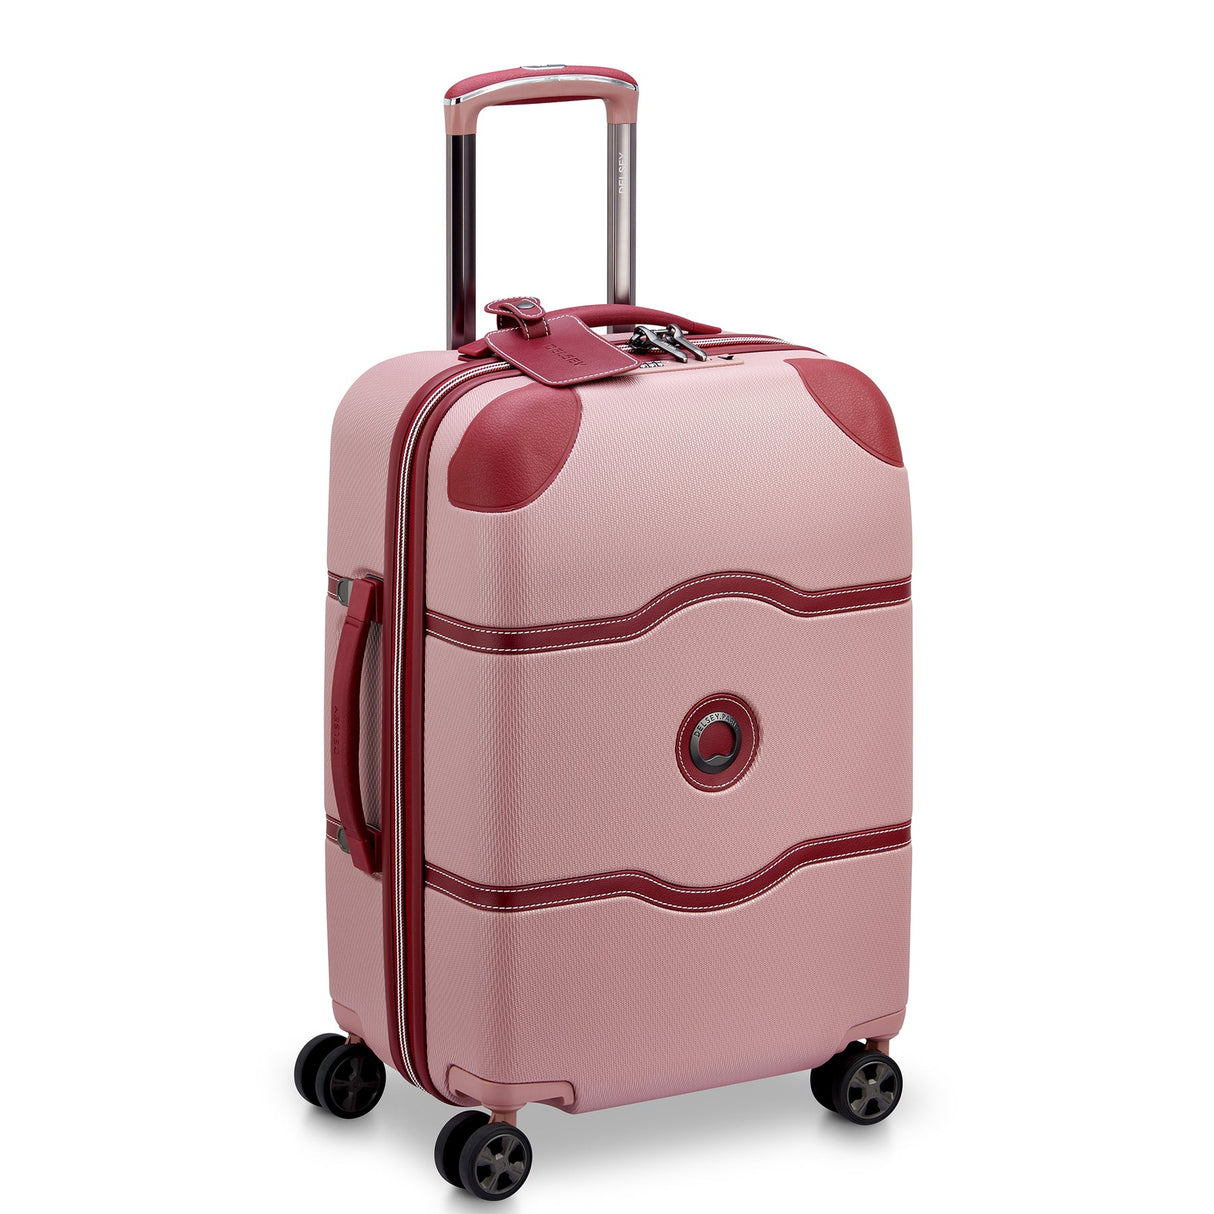 Delsey Chatelet Air 2.0 Carry-On Spinner , , delsey-chatelet-air-2.0-40167680509-02_1800x1800_81311236-300d-40c1-a12f-783dfdd6ed14